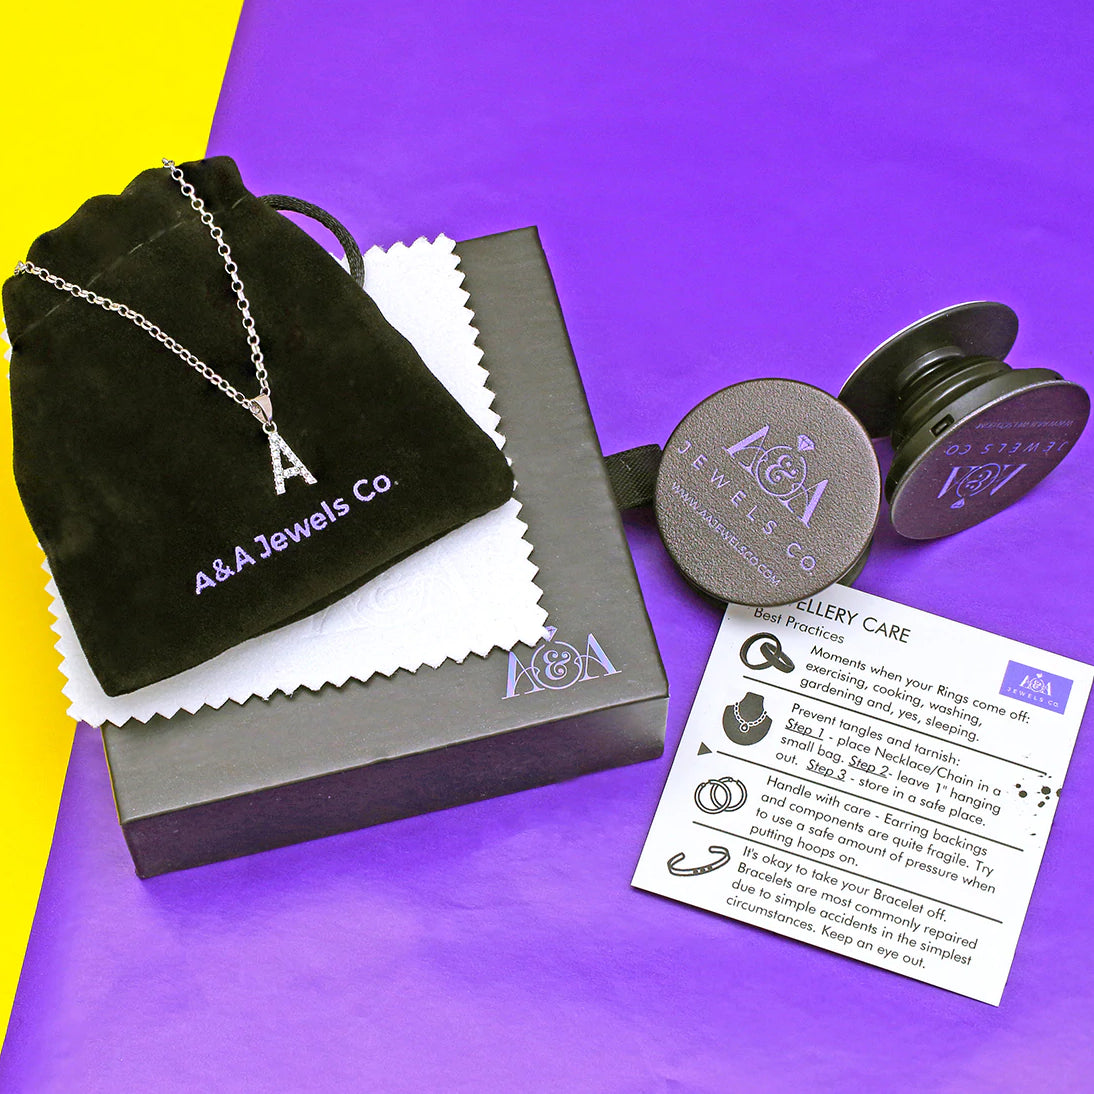 A&A Jewels Co. Packaging with Jewellery Care Card